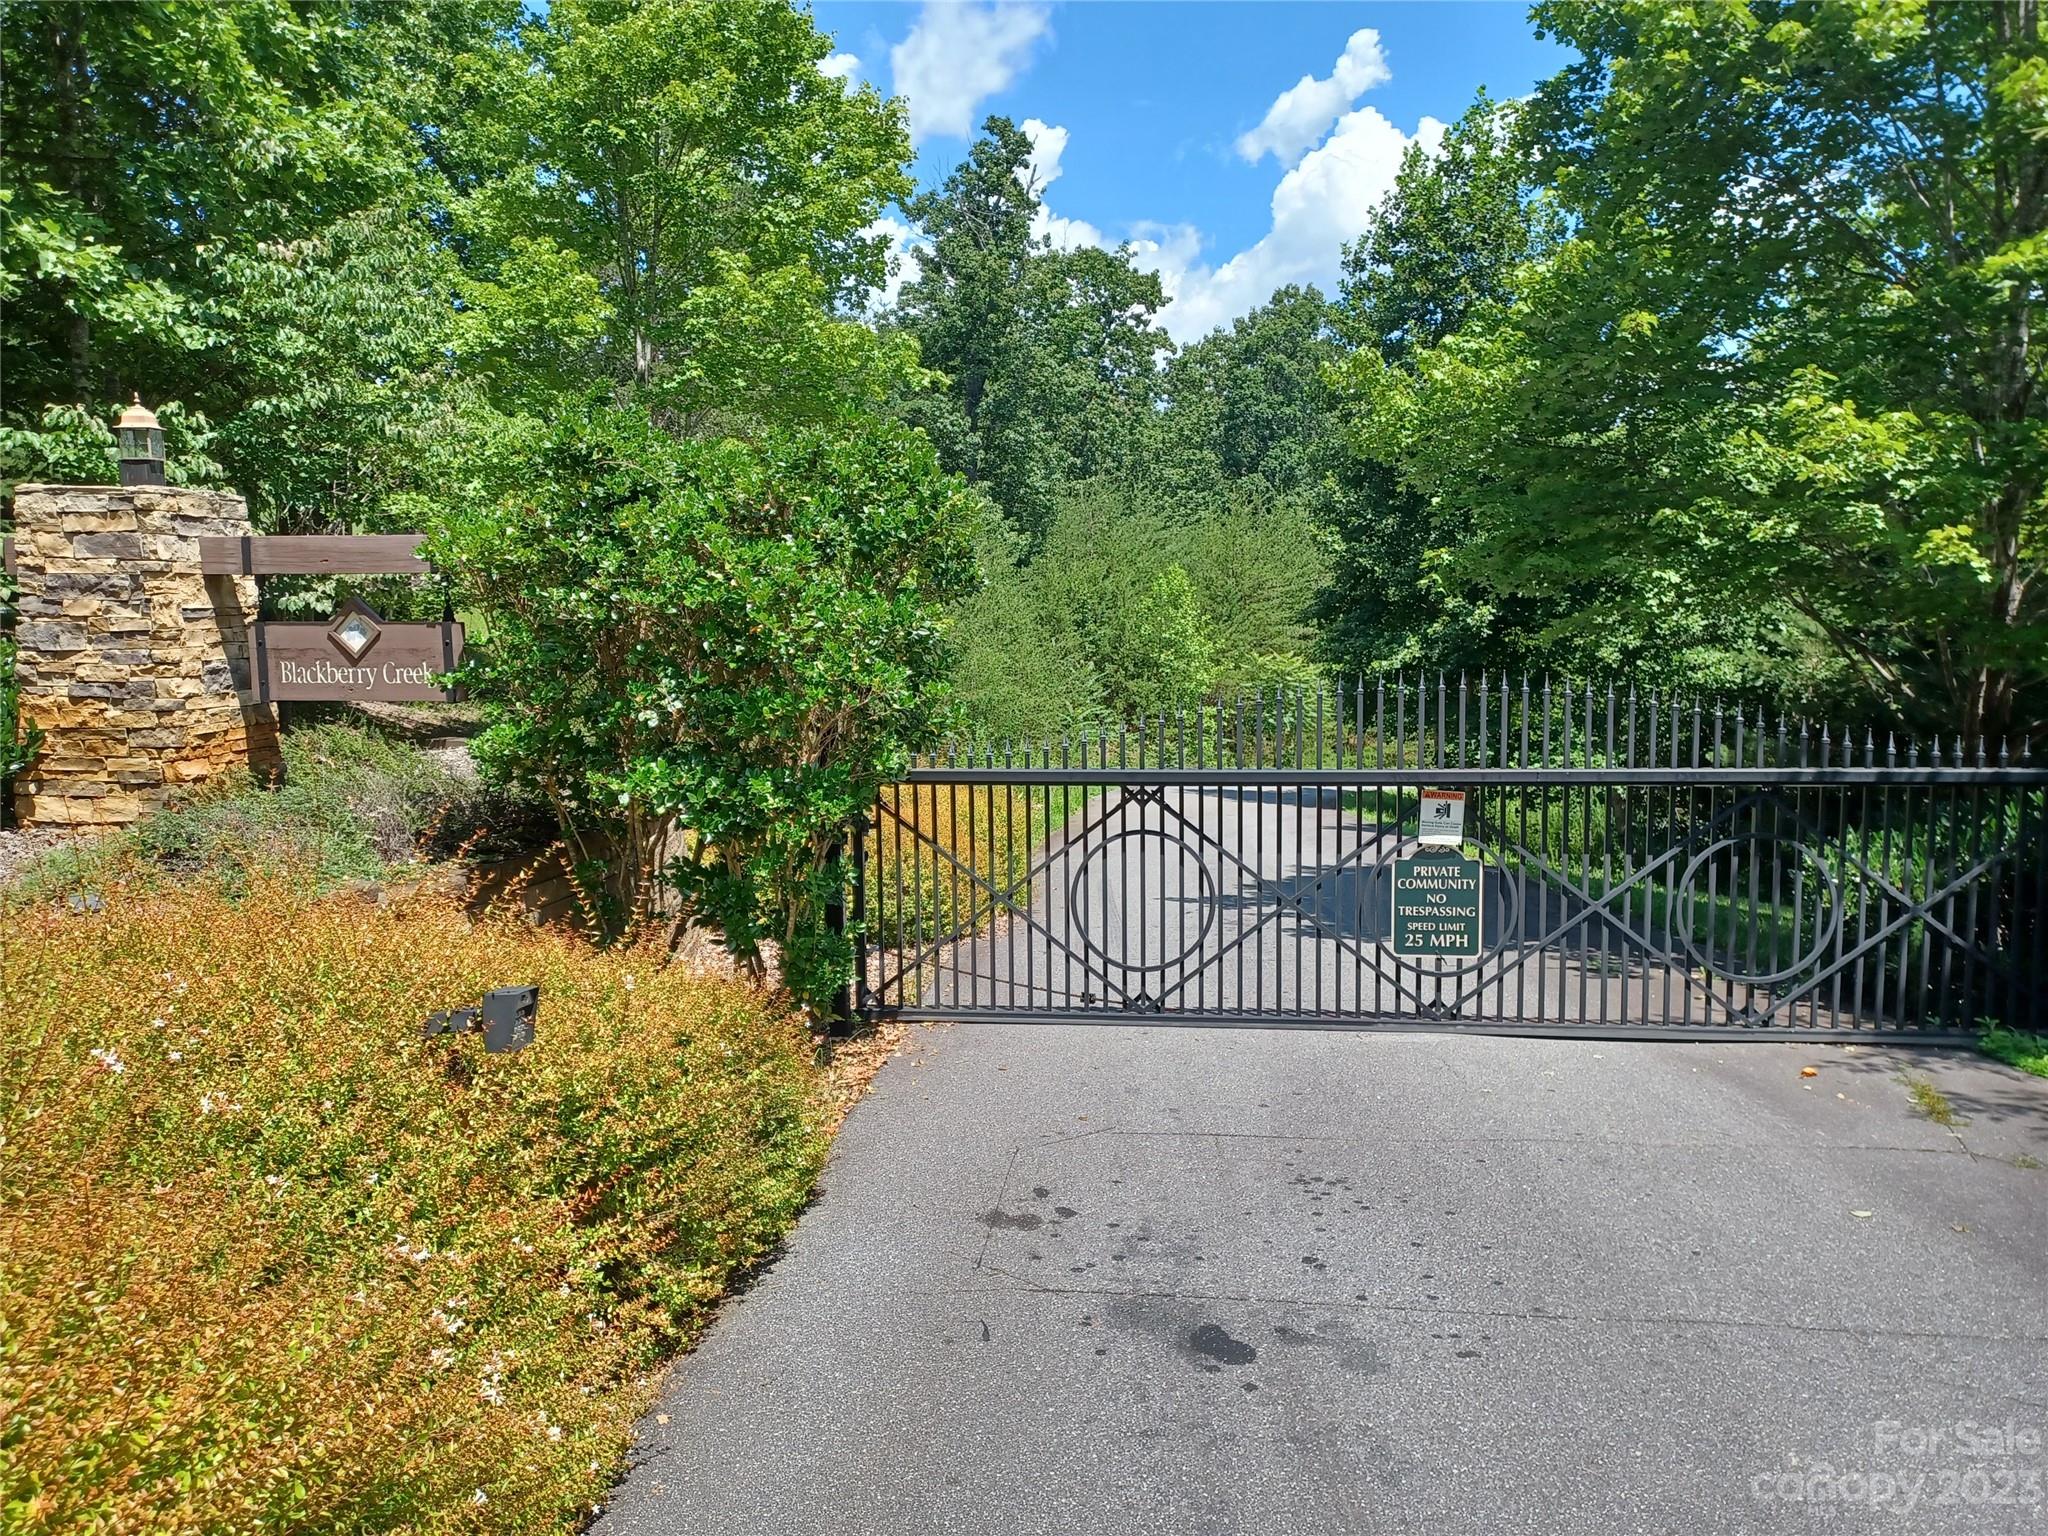 a view of a gate and fence